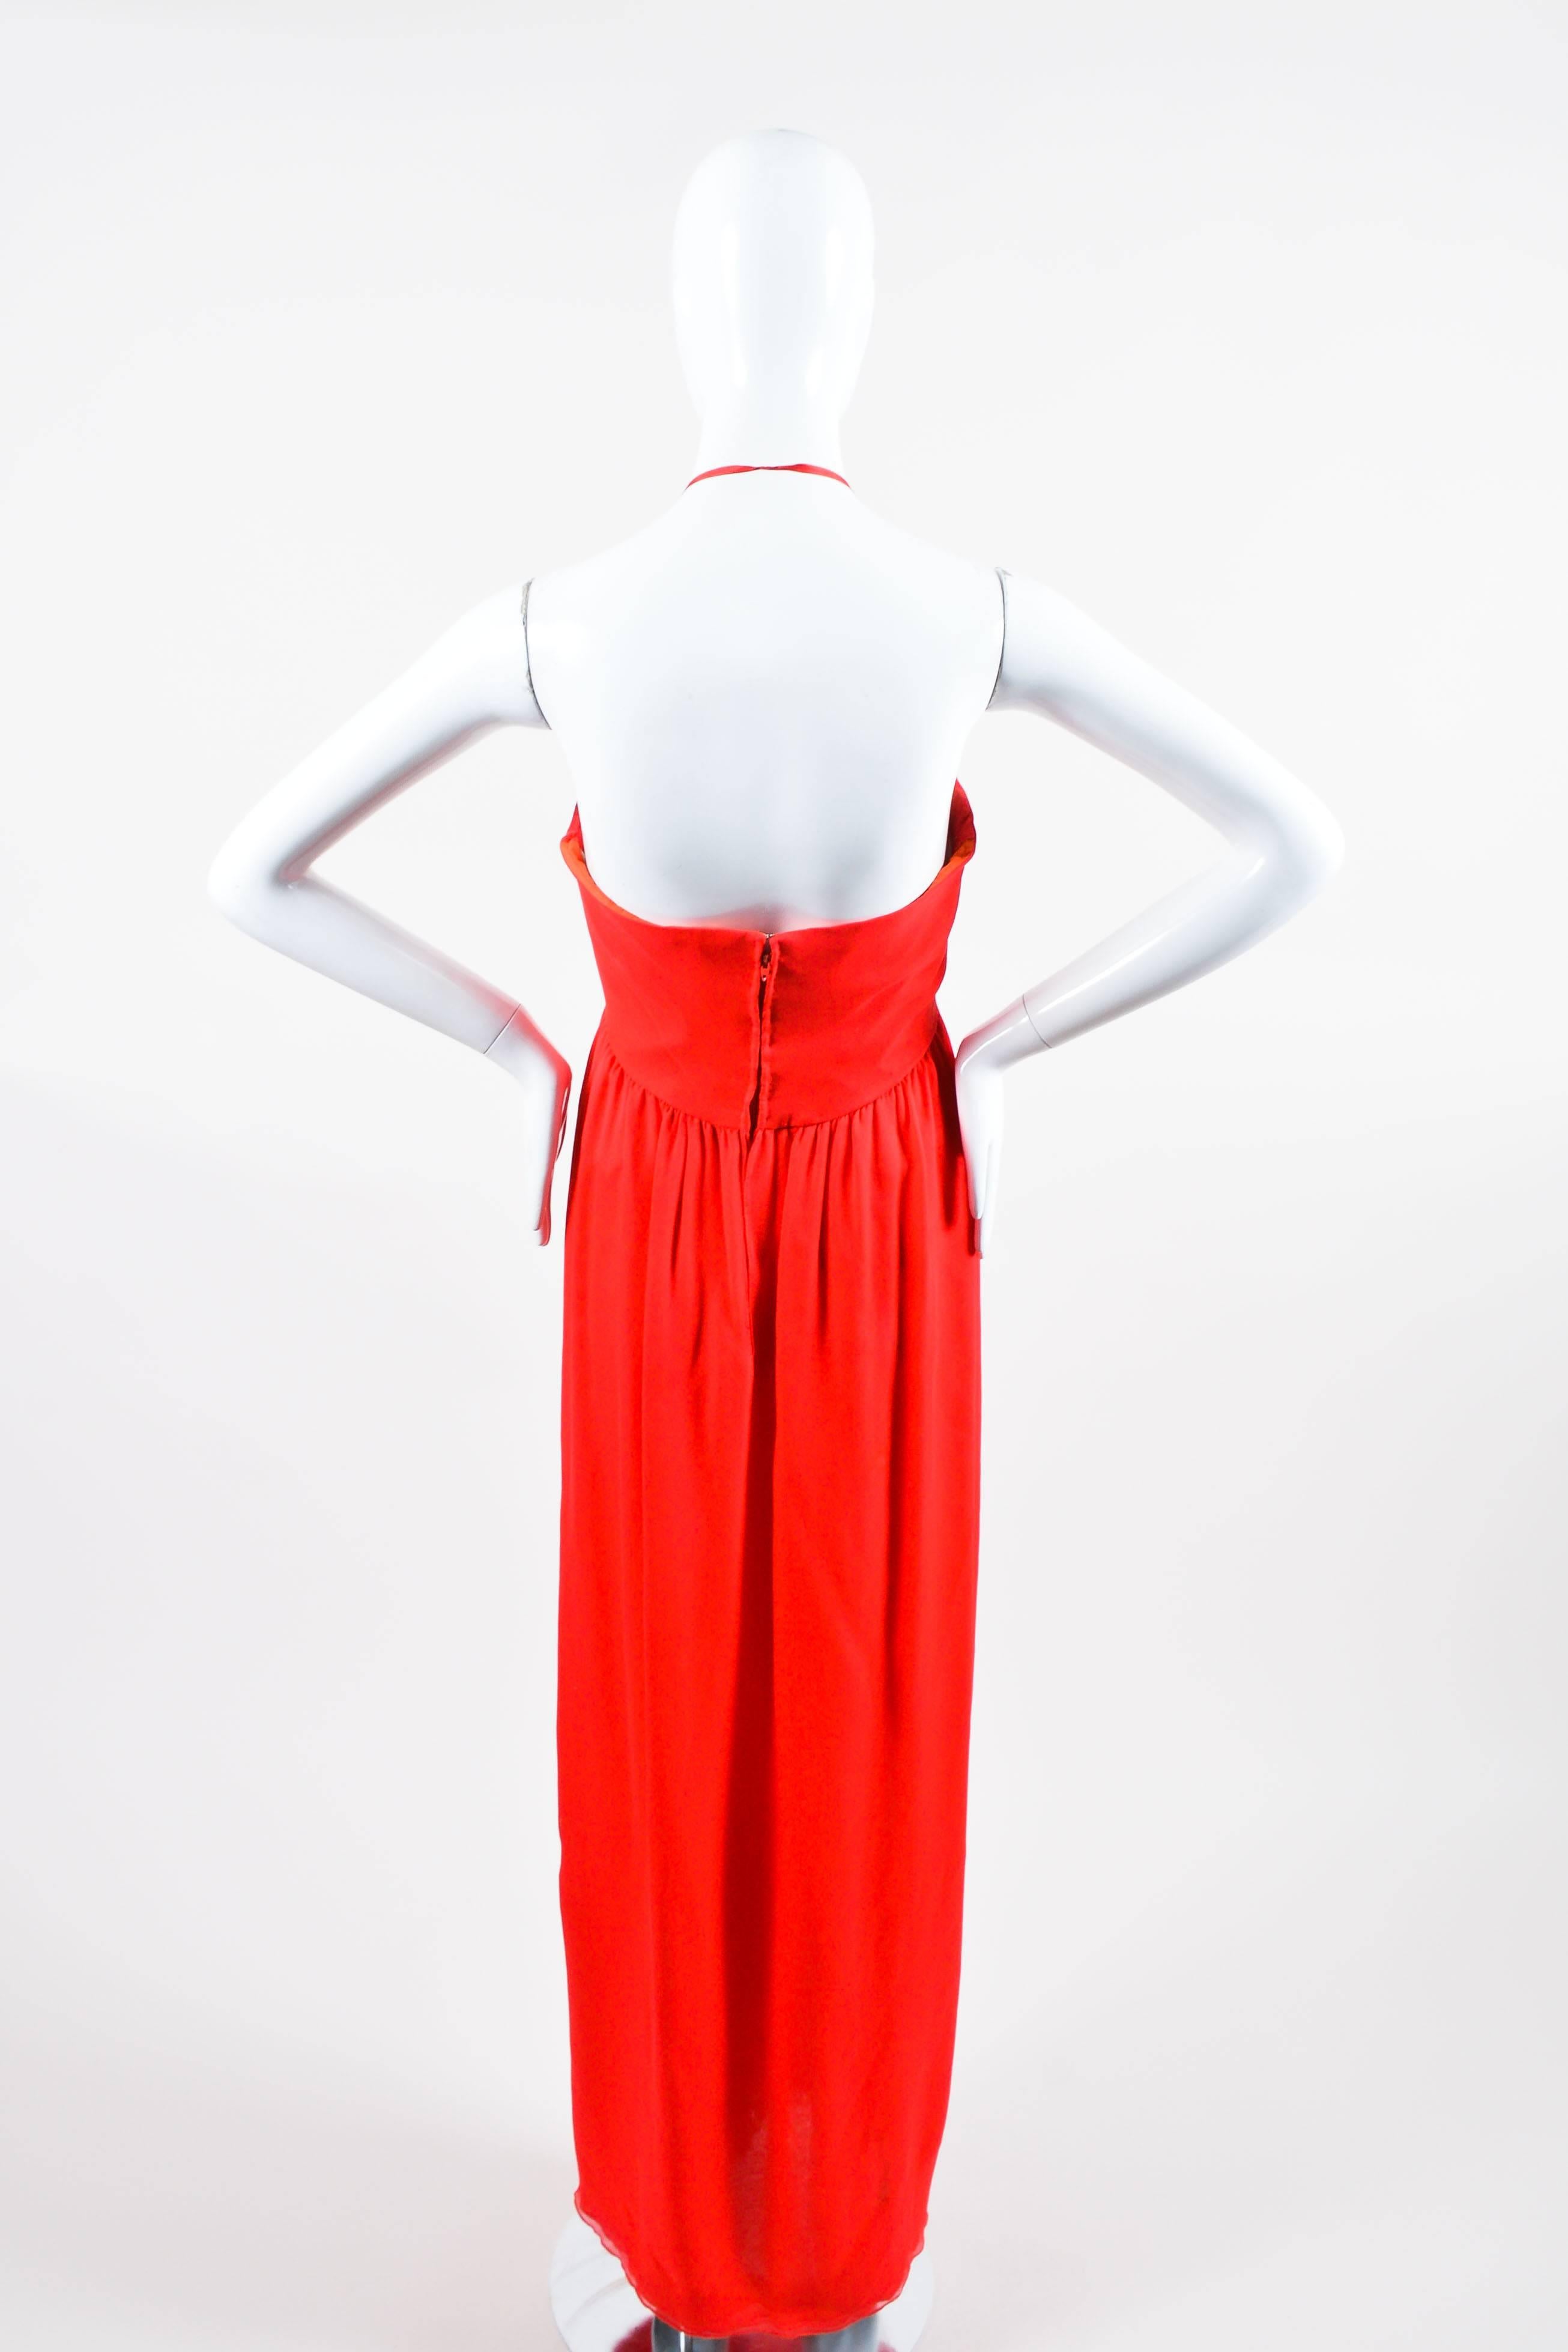 Be the 'lady in red' at your next event in this elegant, strapless gown. Constructed of light, ethereal silk. Tailored bodice features a built-in bustier with vertical boning and lightly padded cups. High waistline. Floaty skirt flares away from